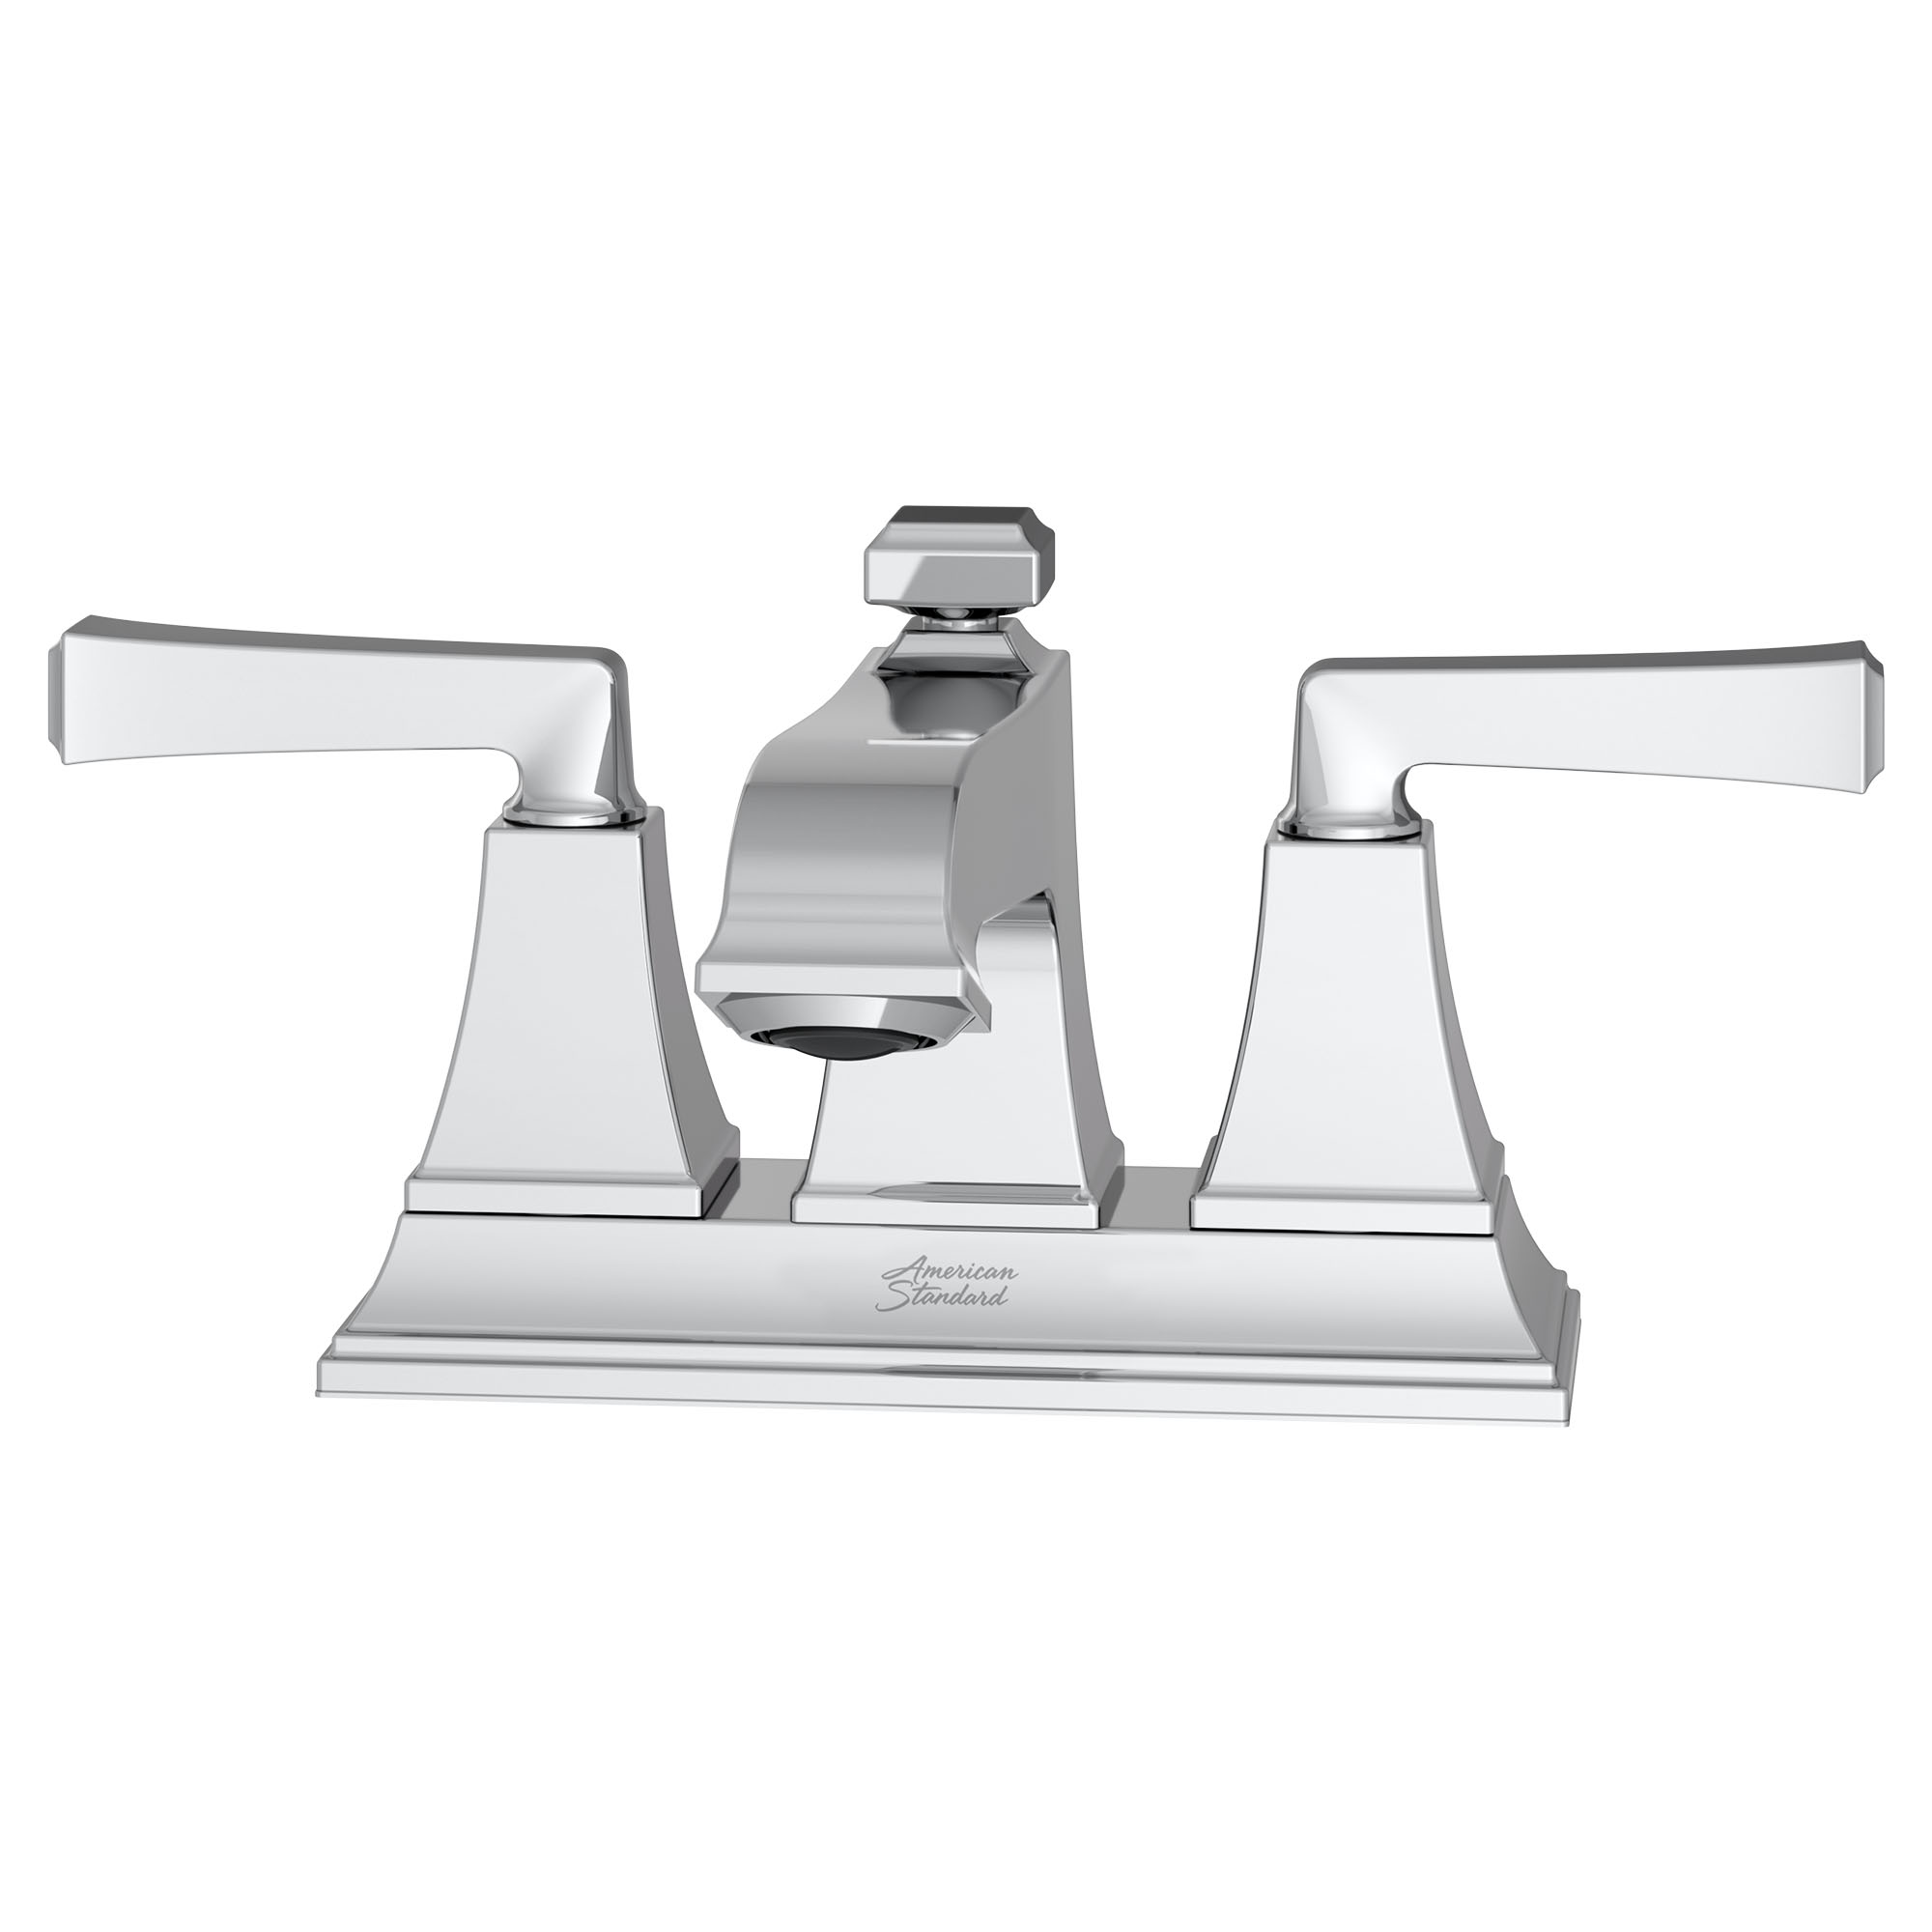 Town Square™ S 4-Inch Centerset 2-Handle Bathroom Faucet 1.2 gpm/4.5 L/min With Lever Handles